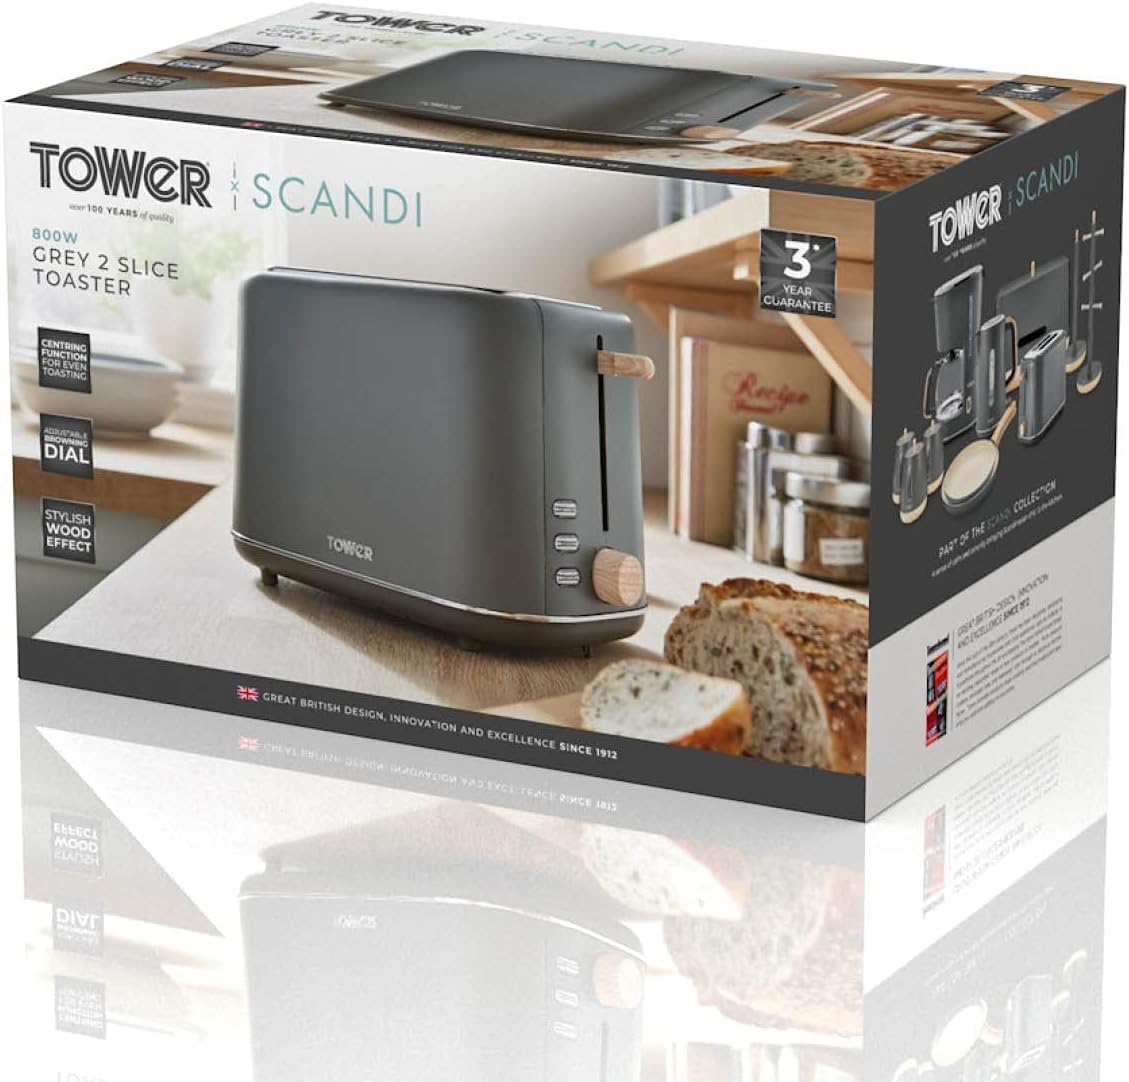 TOWER T20027BLK Scandi 2 Slice Toaster with Adjustable Browning Control, Centring Function, 800W, Black